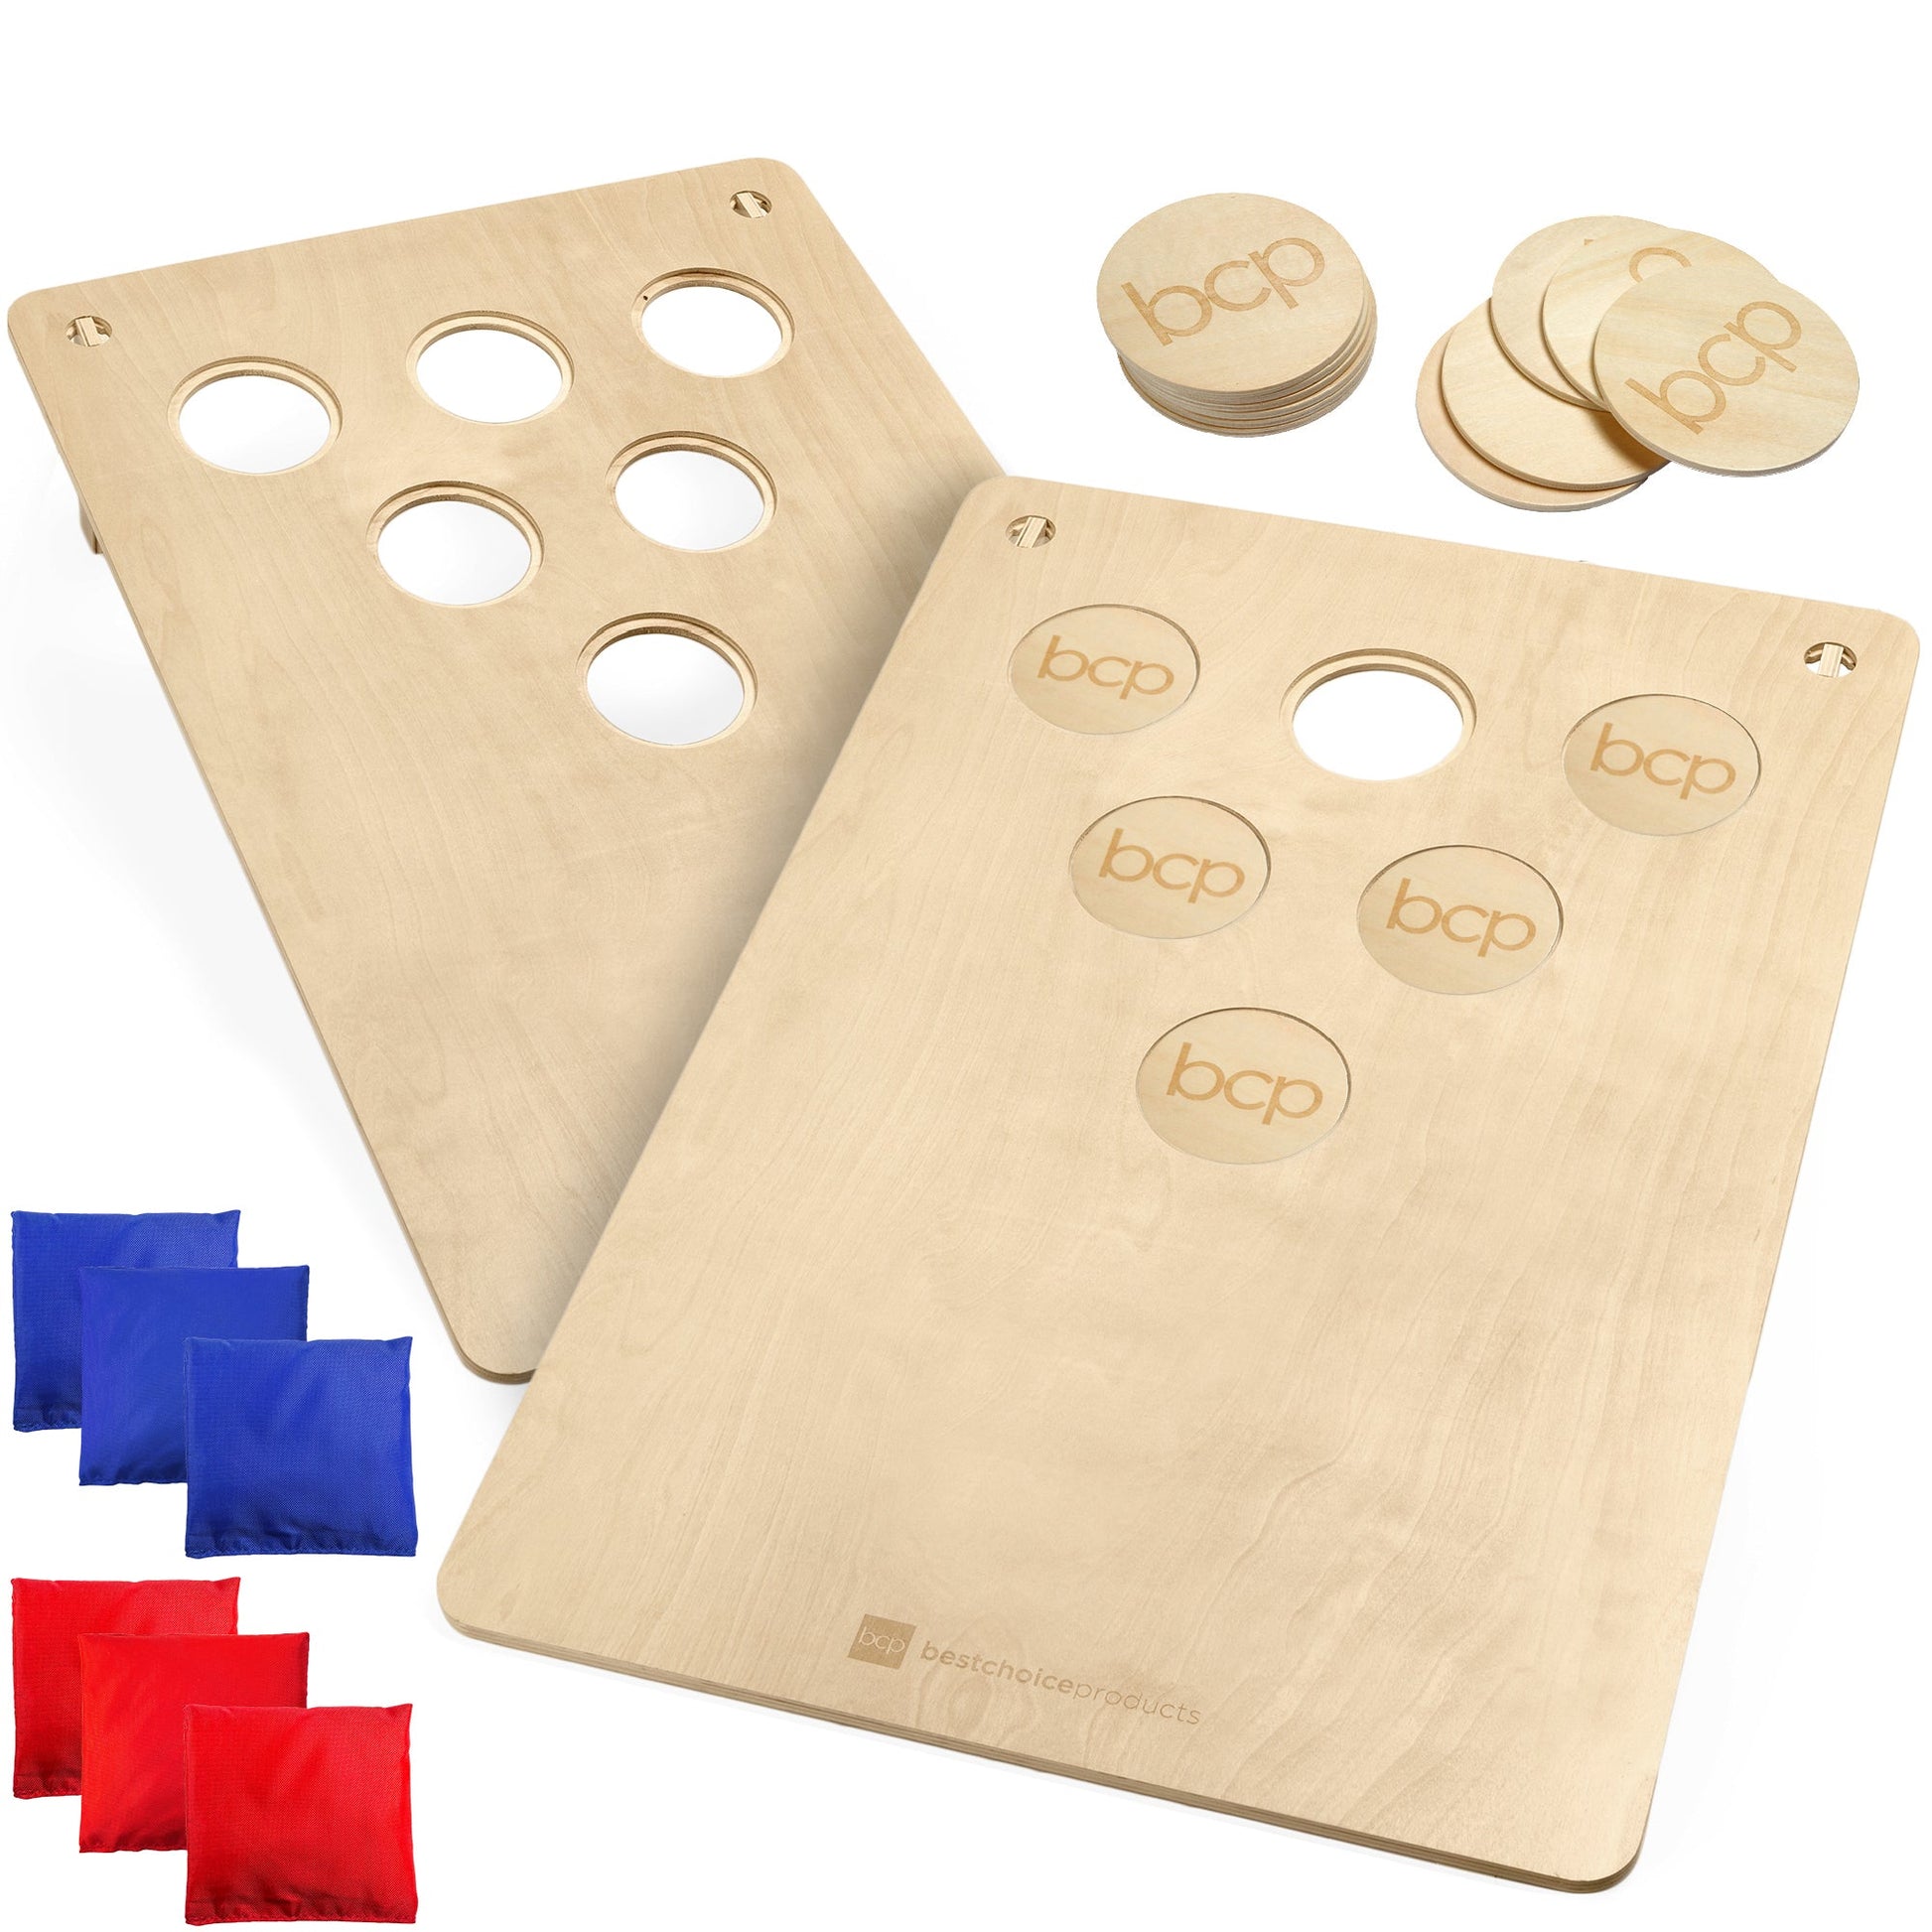 2-In-1 Cornhole & Beer Pong Board Game Set w/ 2 Carrying Bags, 6 Bean Bags